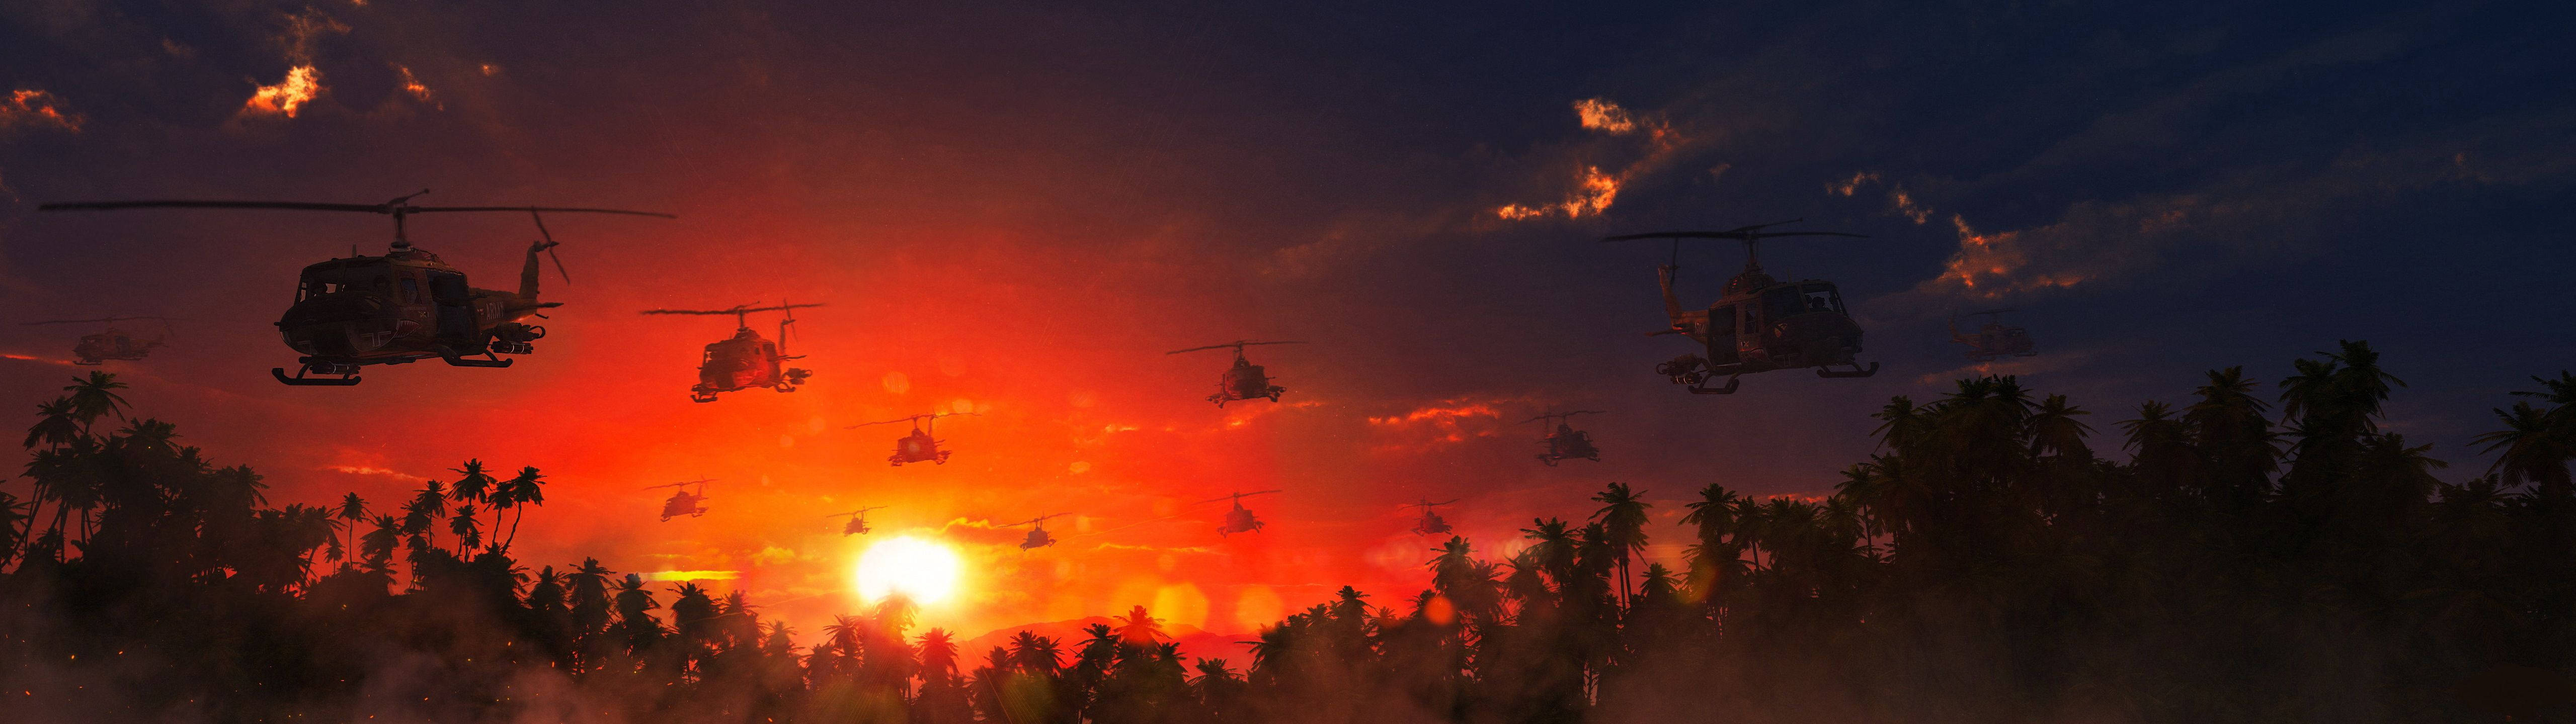 Image  Two Helicopters at Sunset Wallpaper